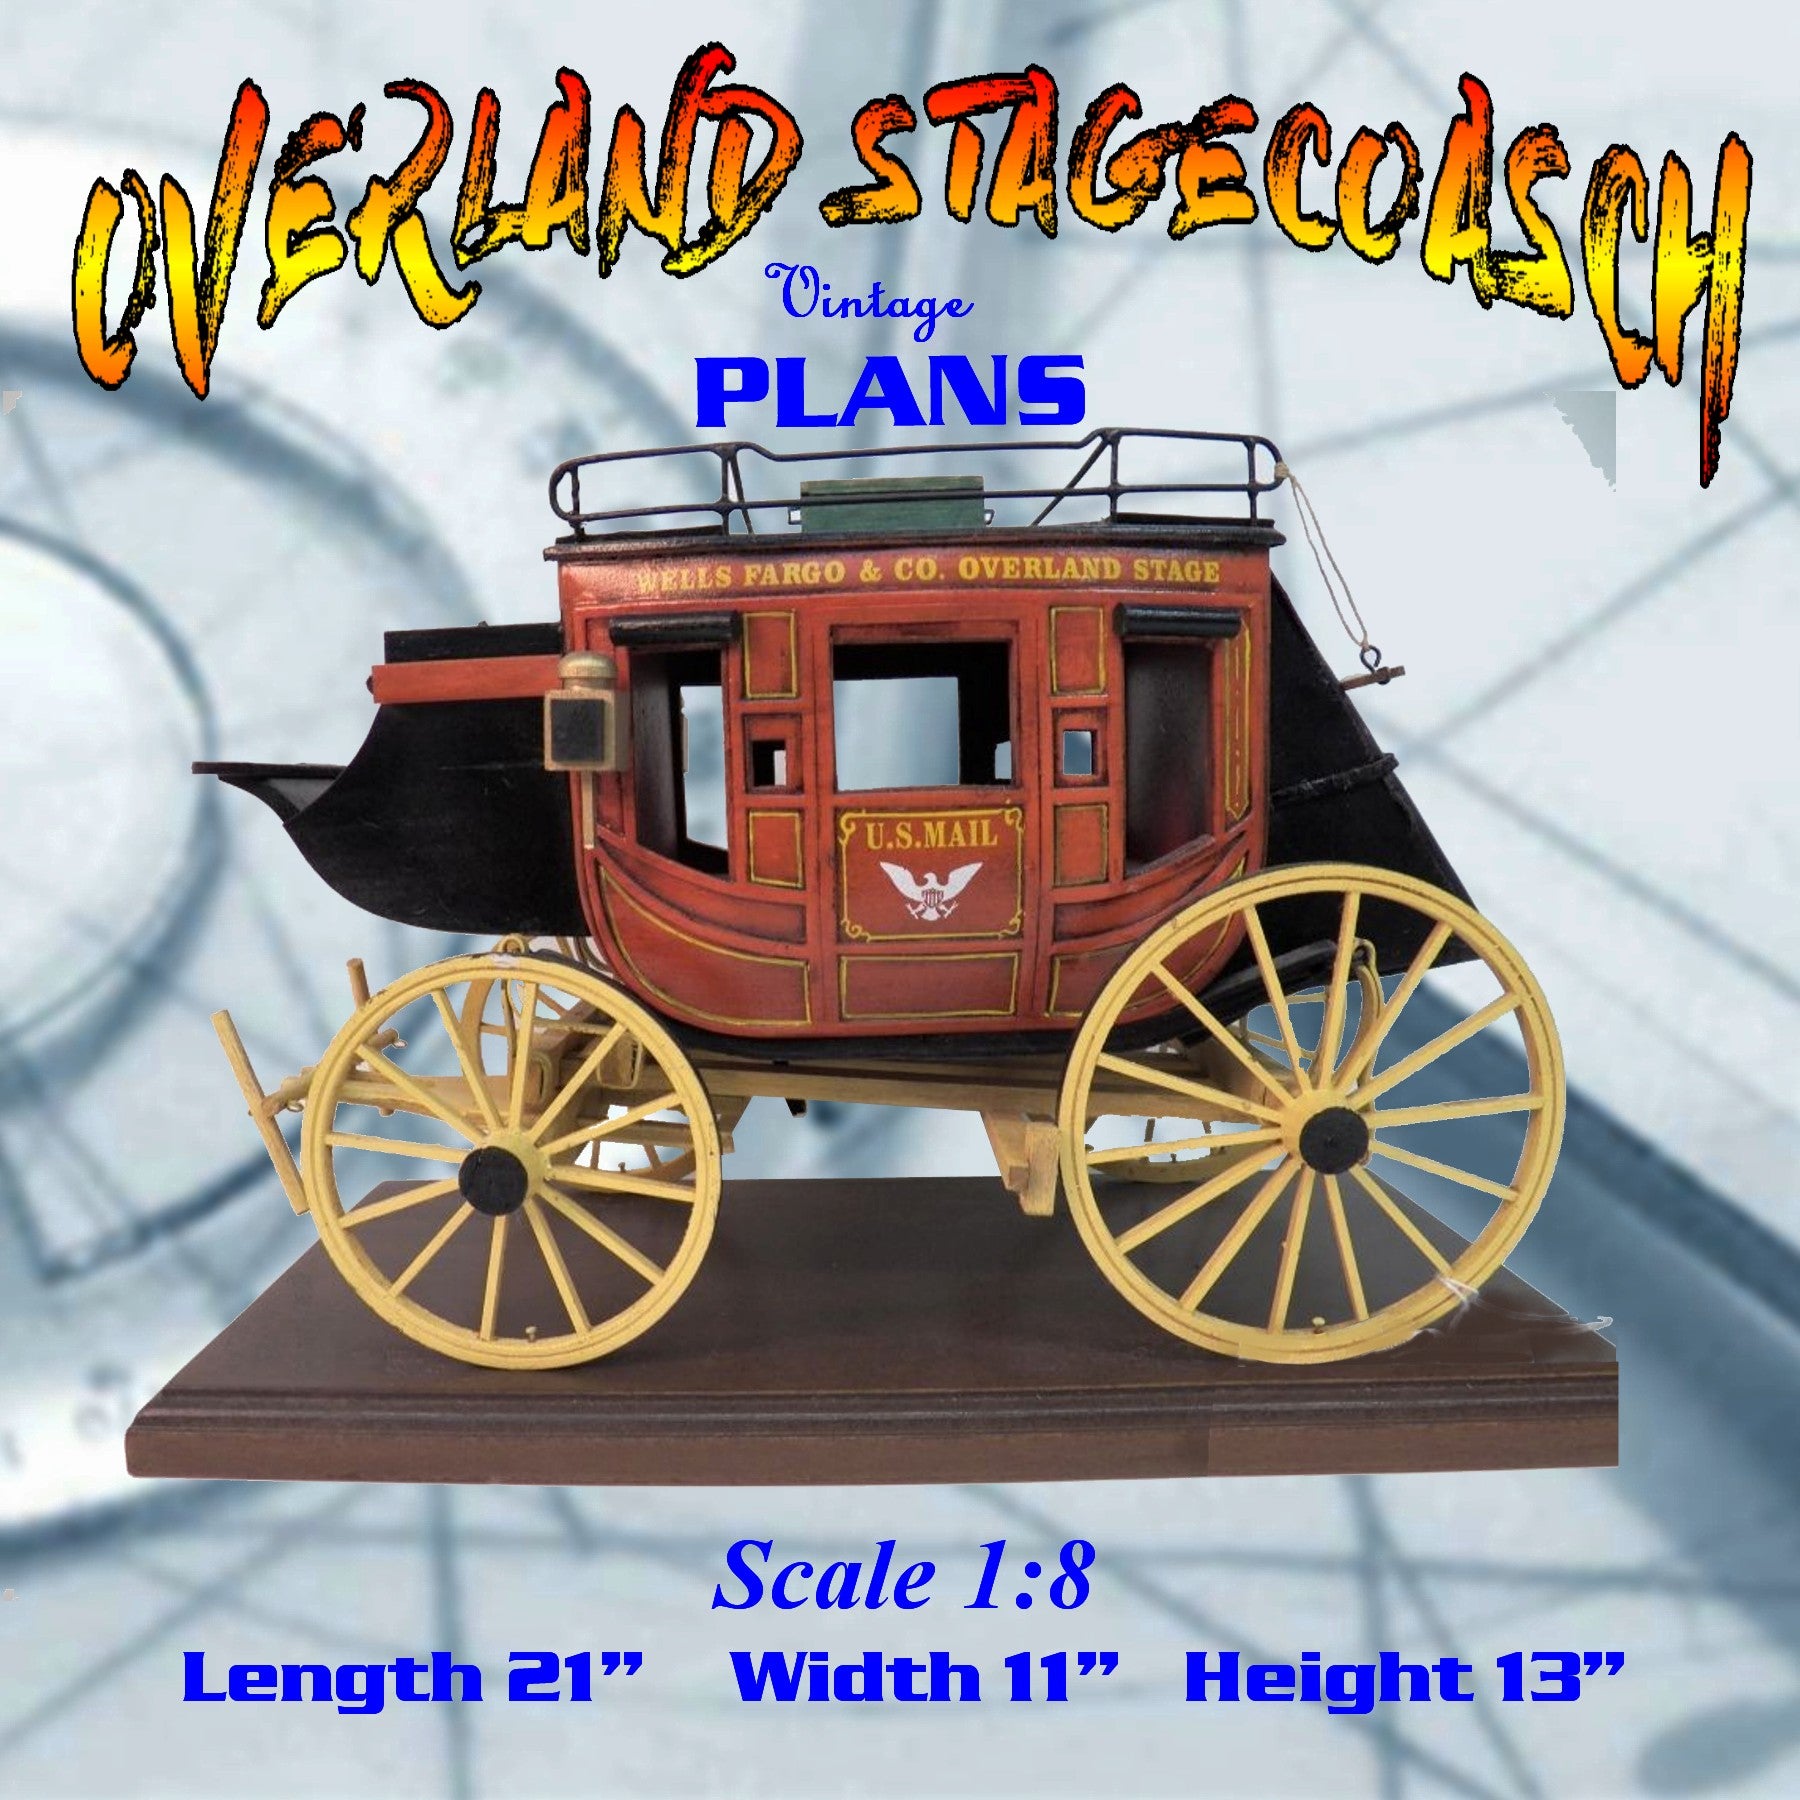 full size printed plans 1:8 scale overland stagecoach  plan only the pony express route